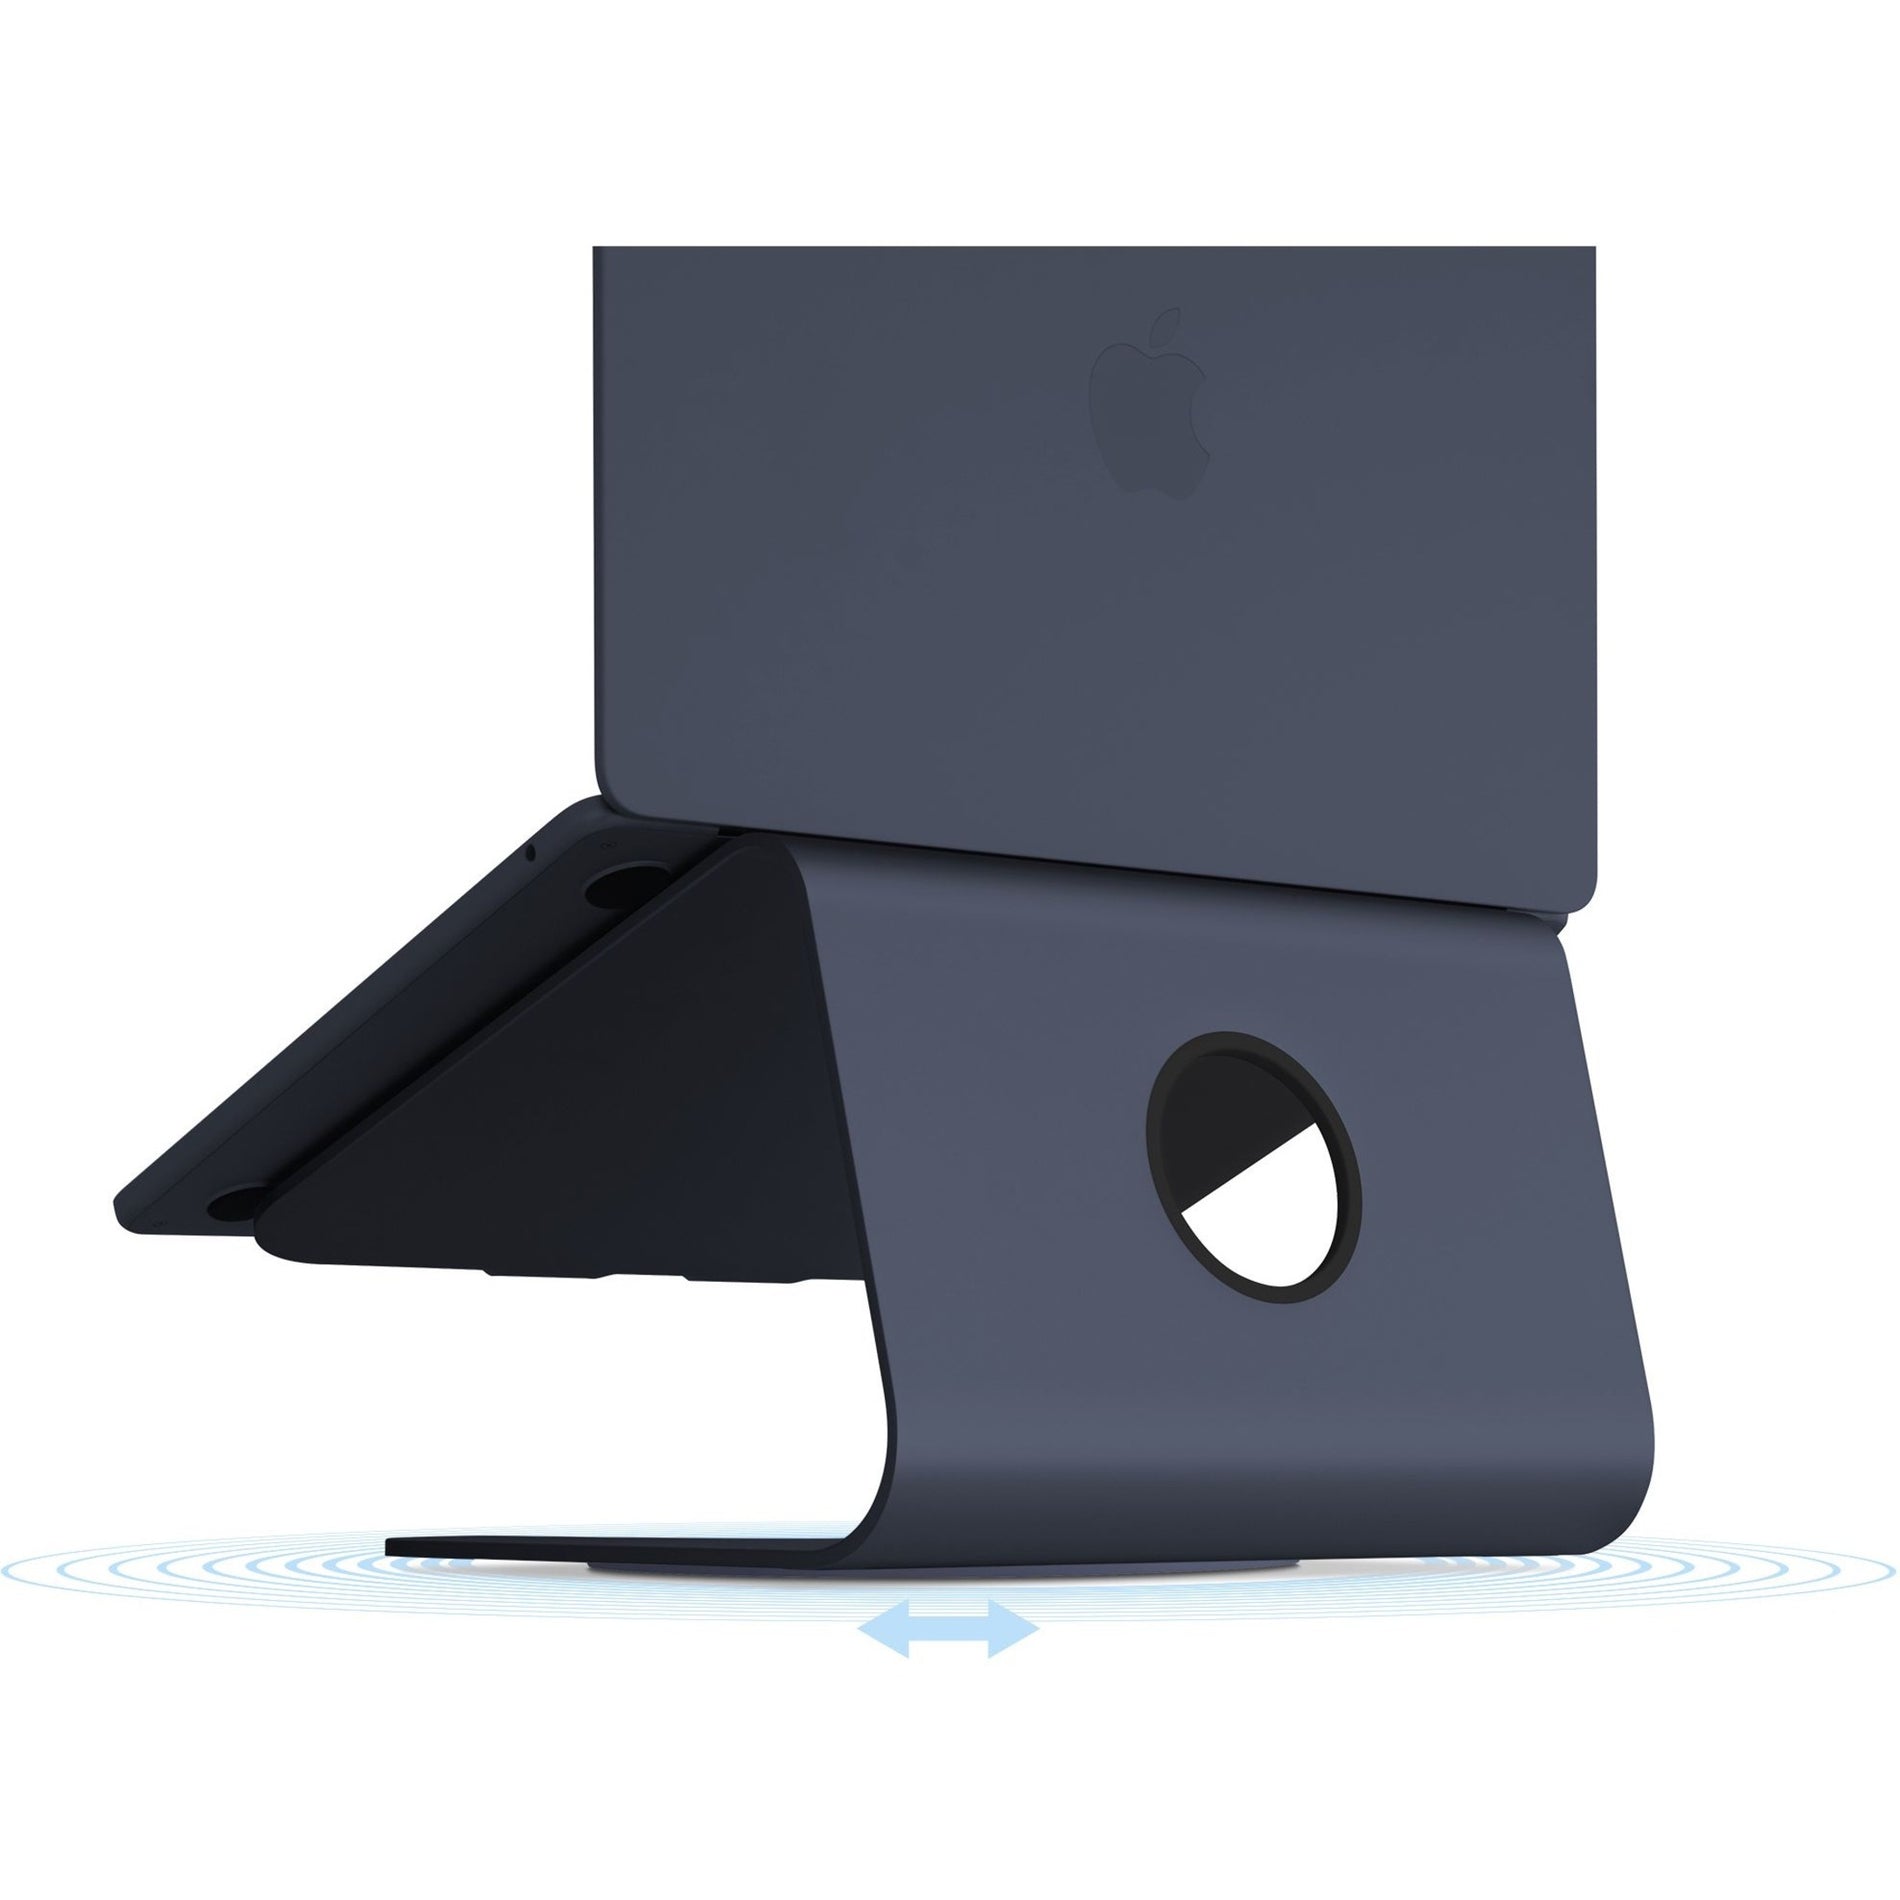 Rain Design 10091 mStand360 Laptop Stand w/ Swivel Base - Midnight, Cable Management, Ventilated, 360° Swivel Base